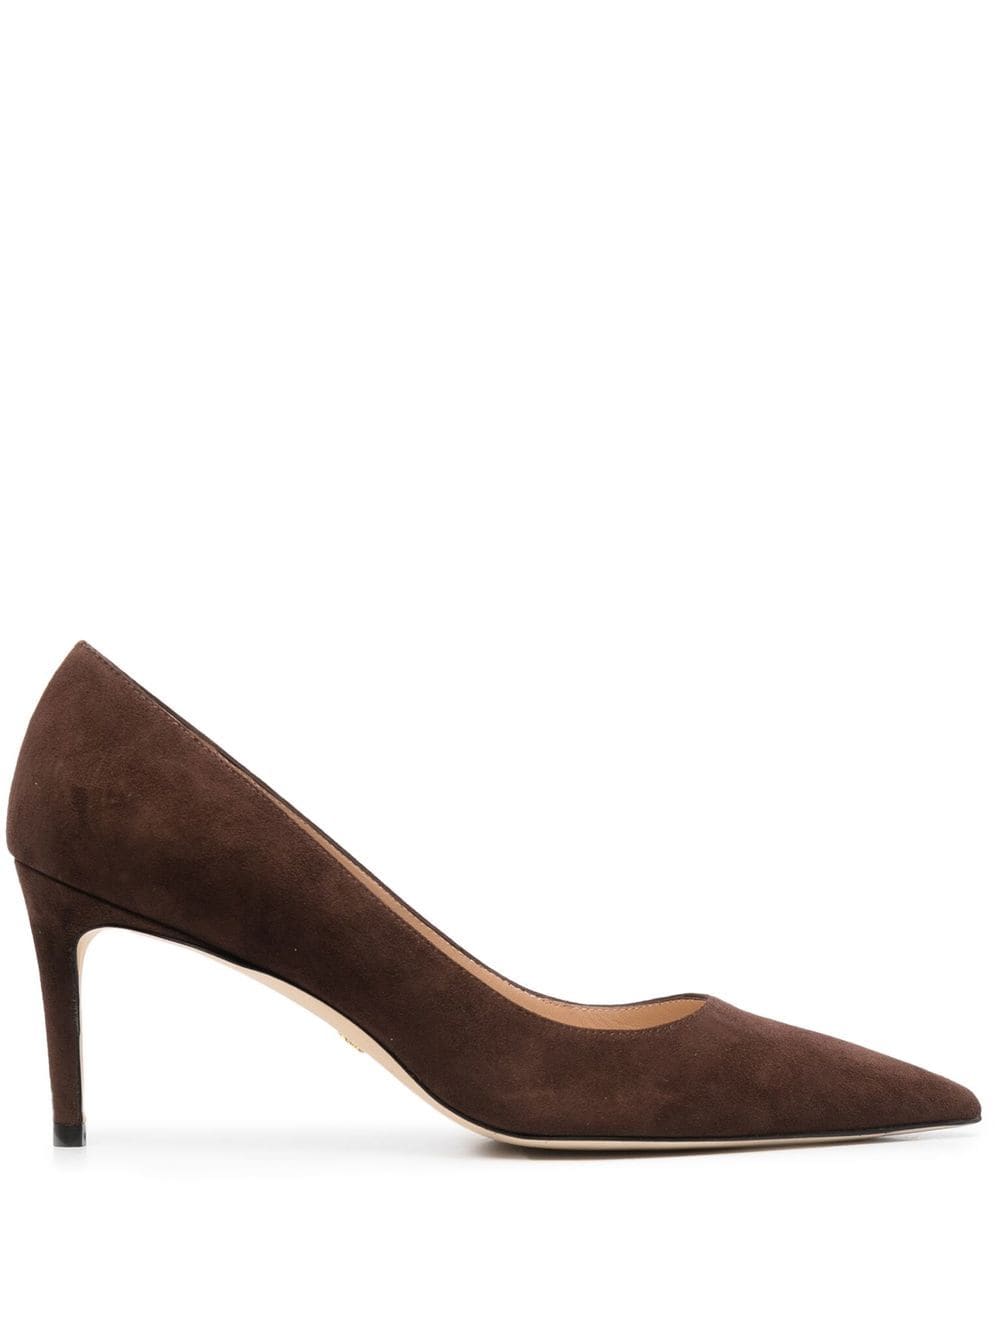 Pointed Toe Suede Pump 75mm - More Colors Available